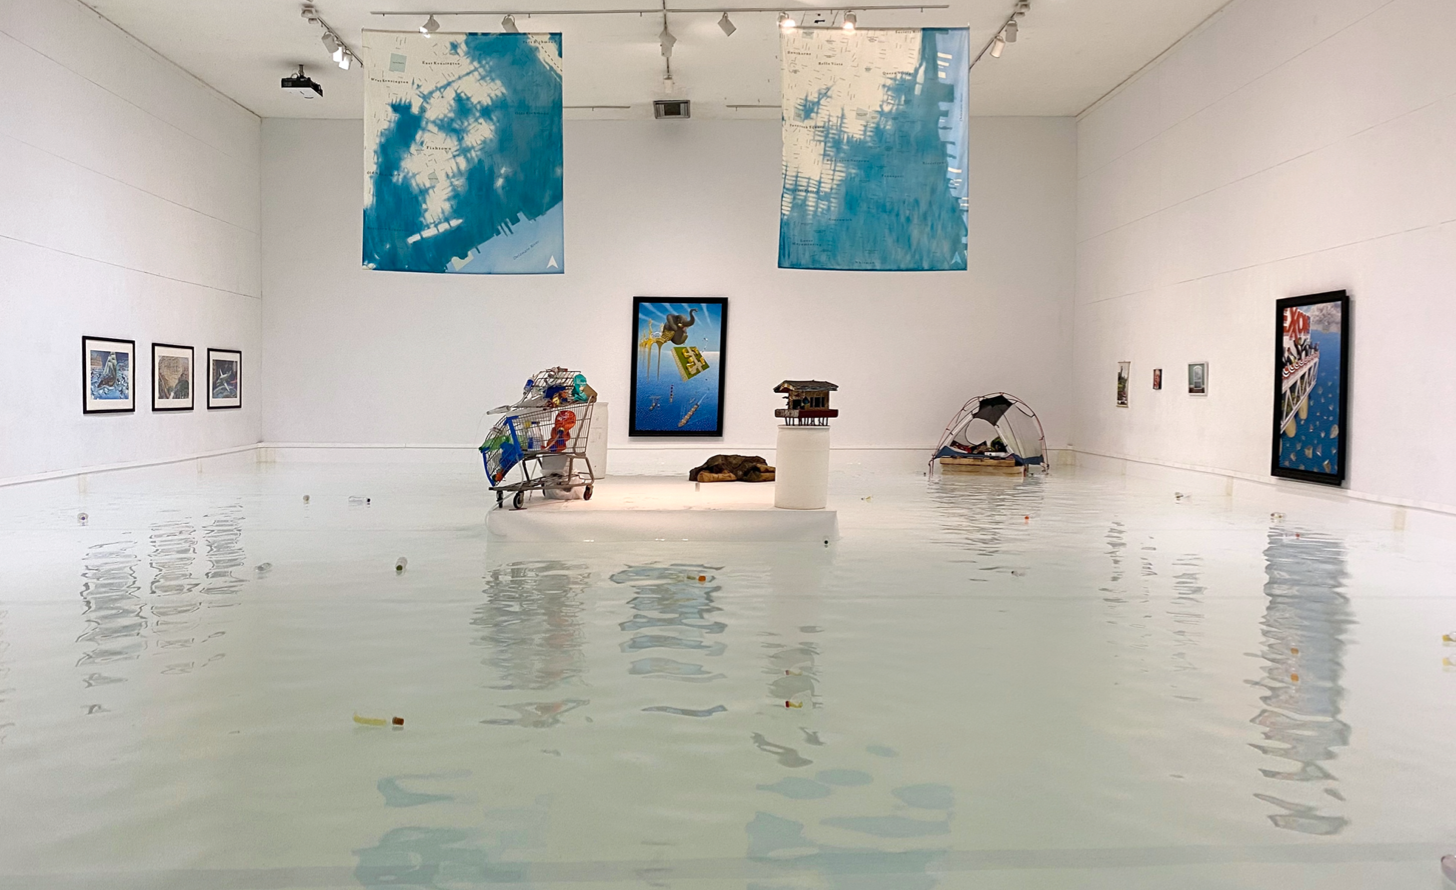 'The interior of the Icebox Project space, flooded with 6 inches of water on the floor, sculptures floating in the space, and paintings and other art hanging on the wall'